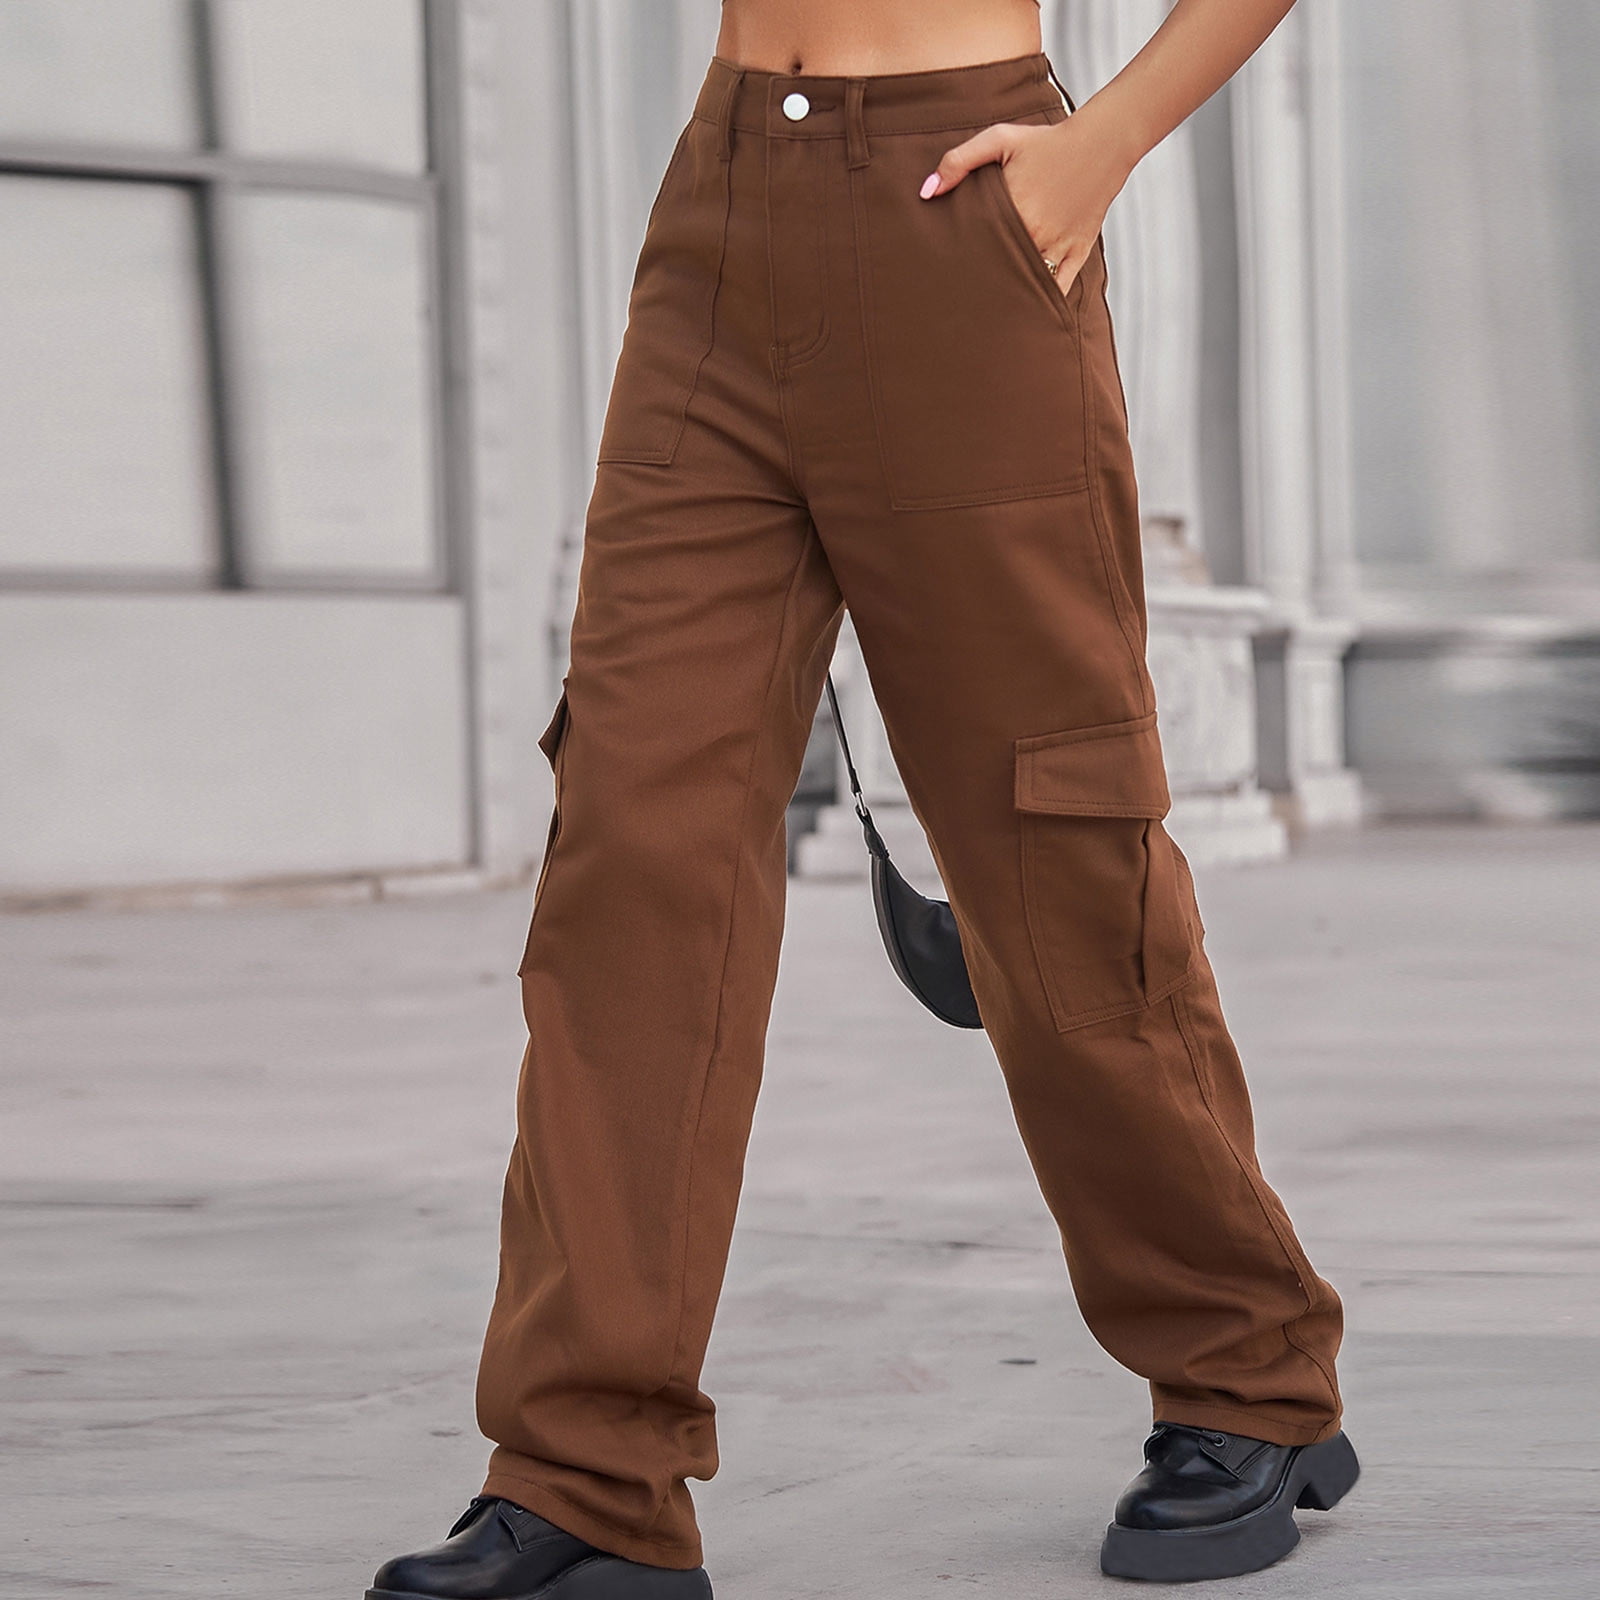 Gaecuw Cargo Pants Women Baggy Jeans Relaxed Fit Long Pants Button